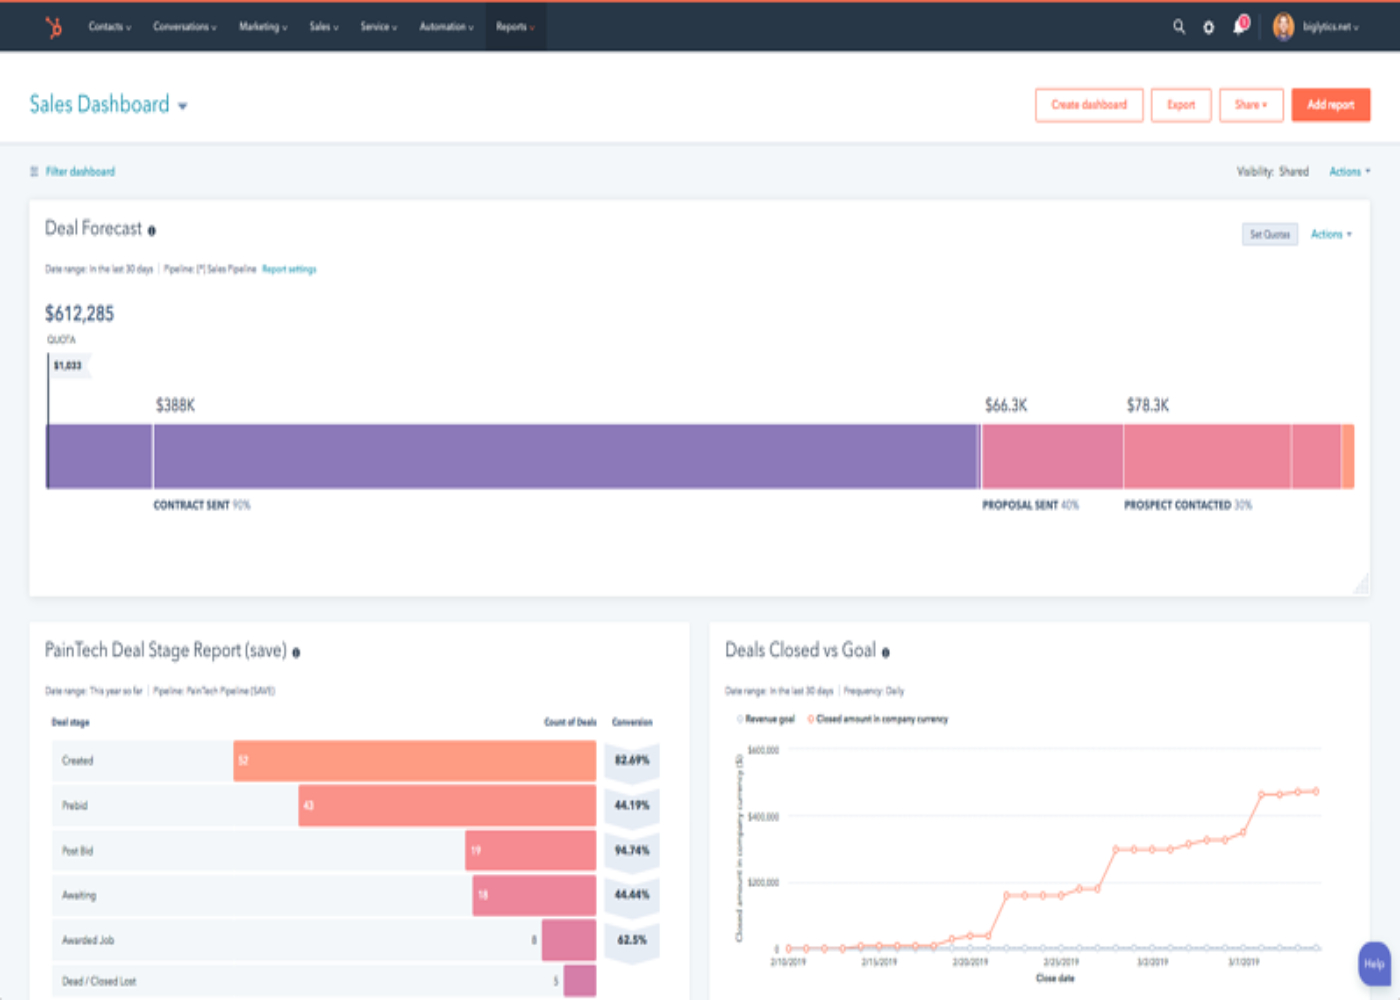 Sample view of HubSpot sales dashboard.